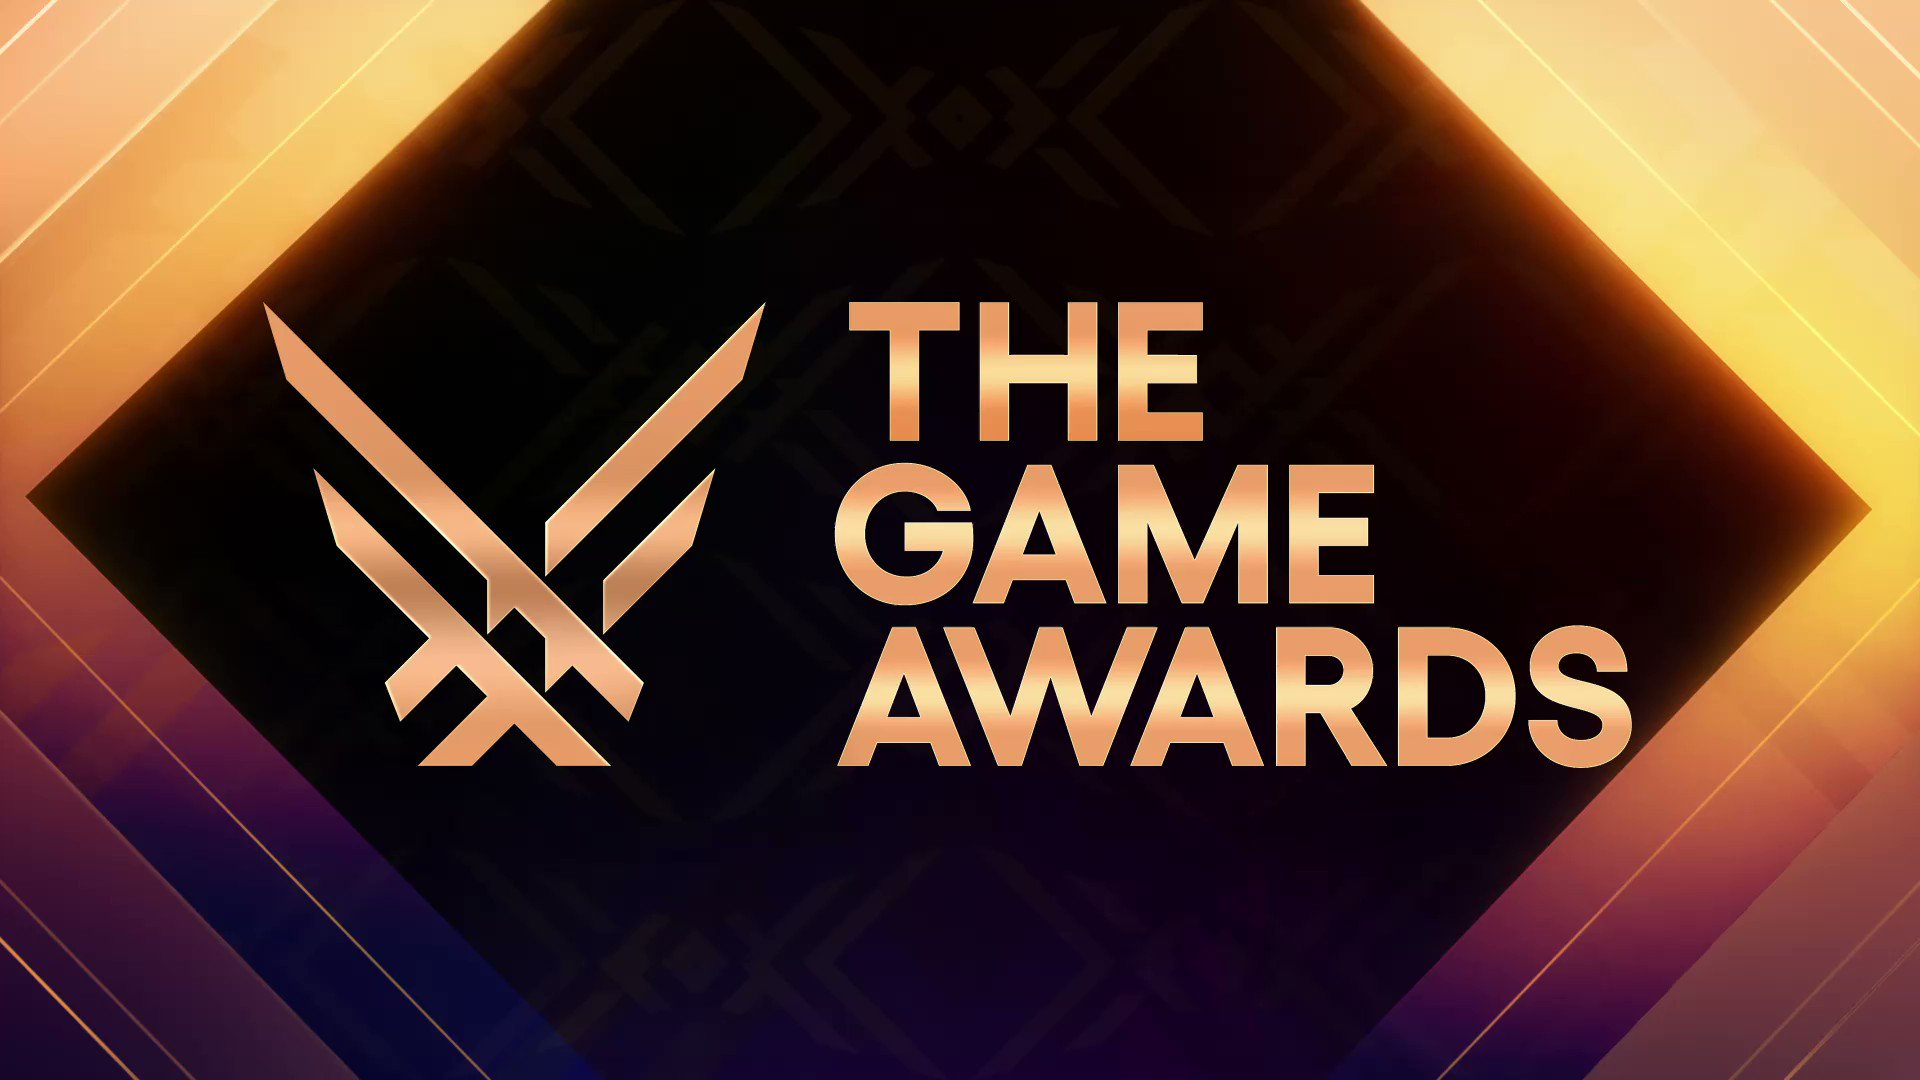 Sonic Superstars was nominated for Best Family Game at @thegameawards